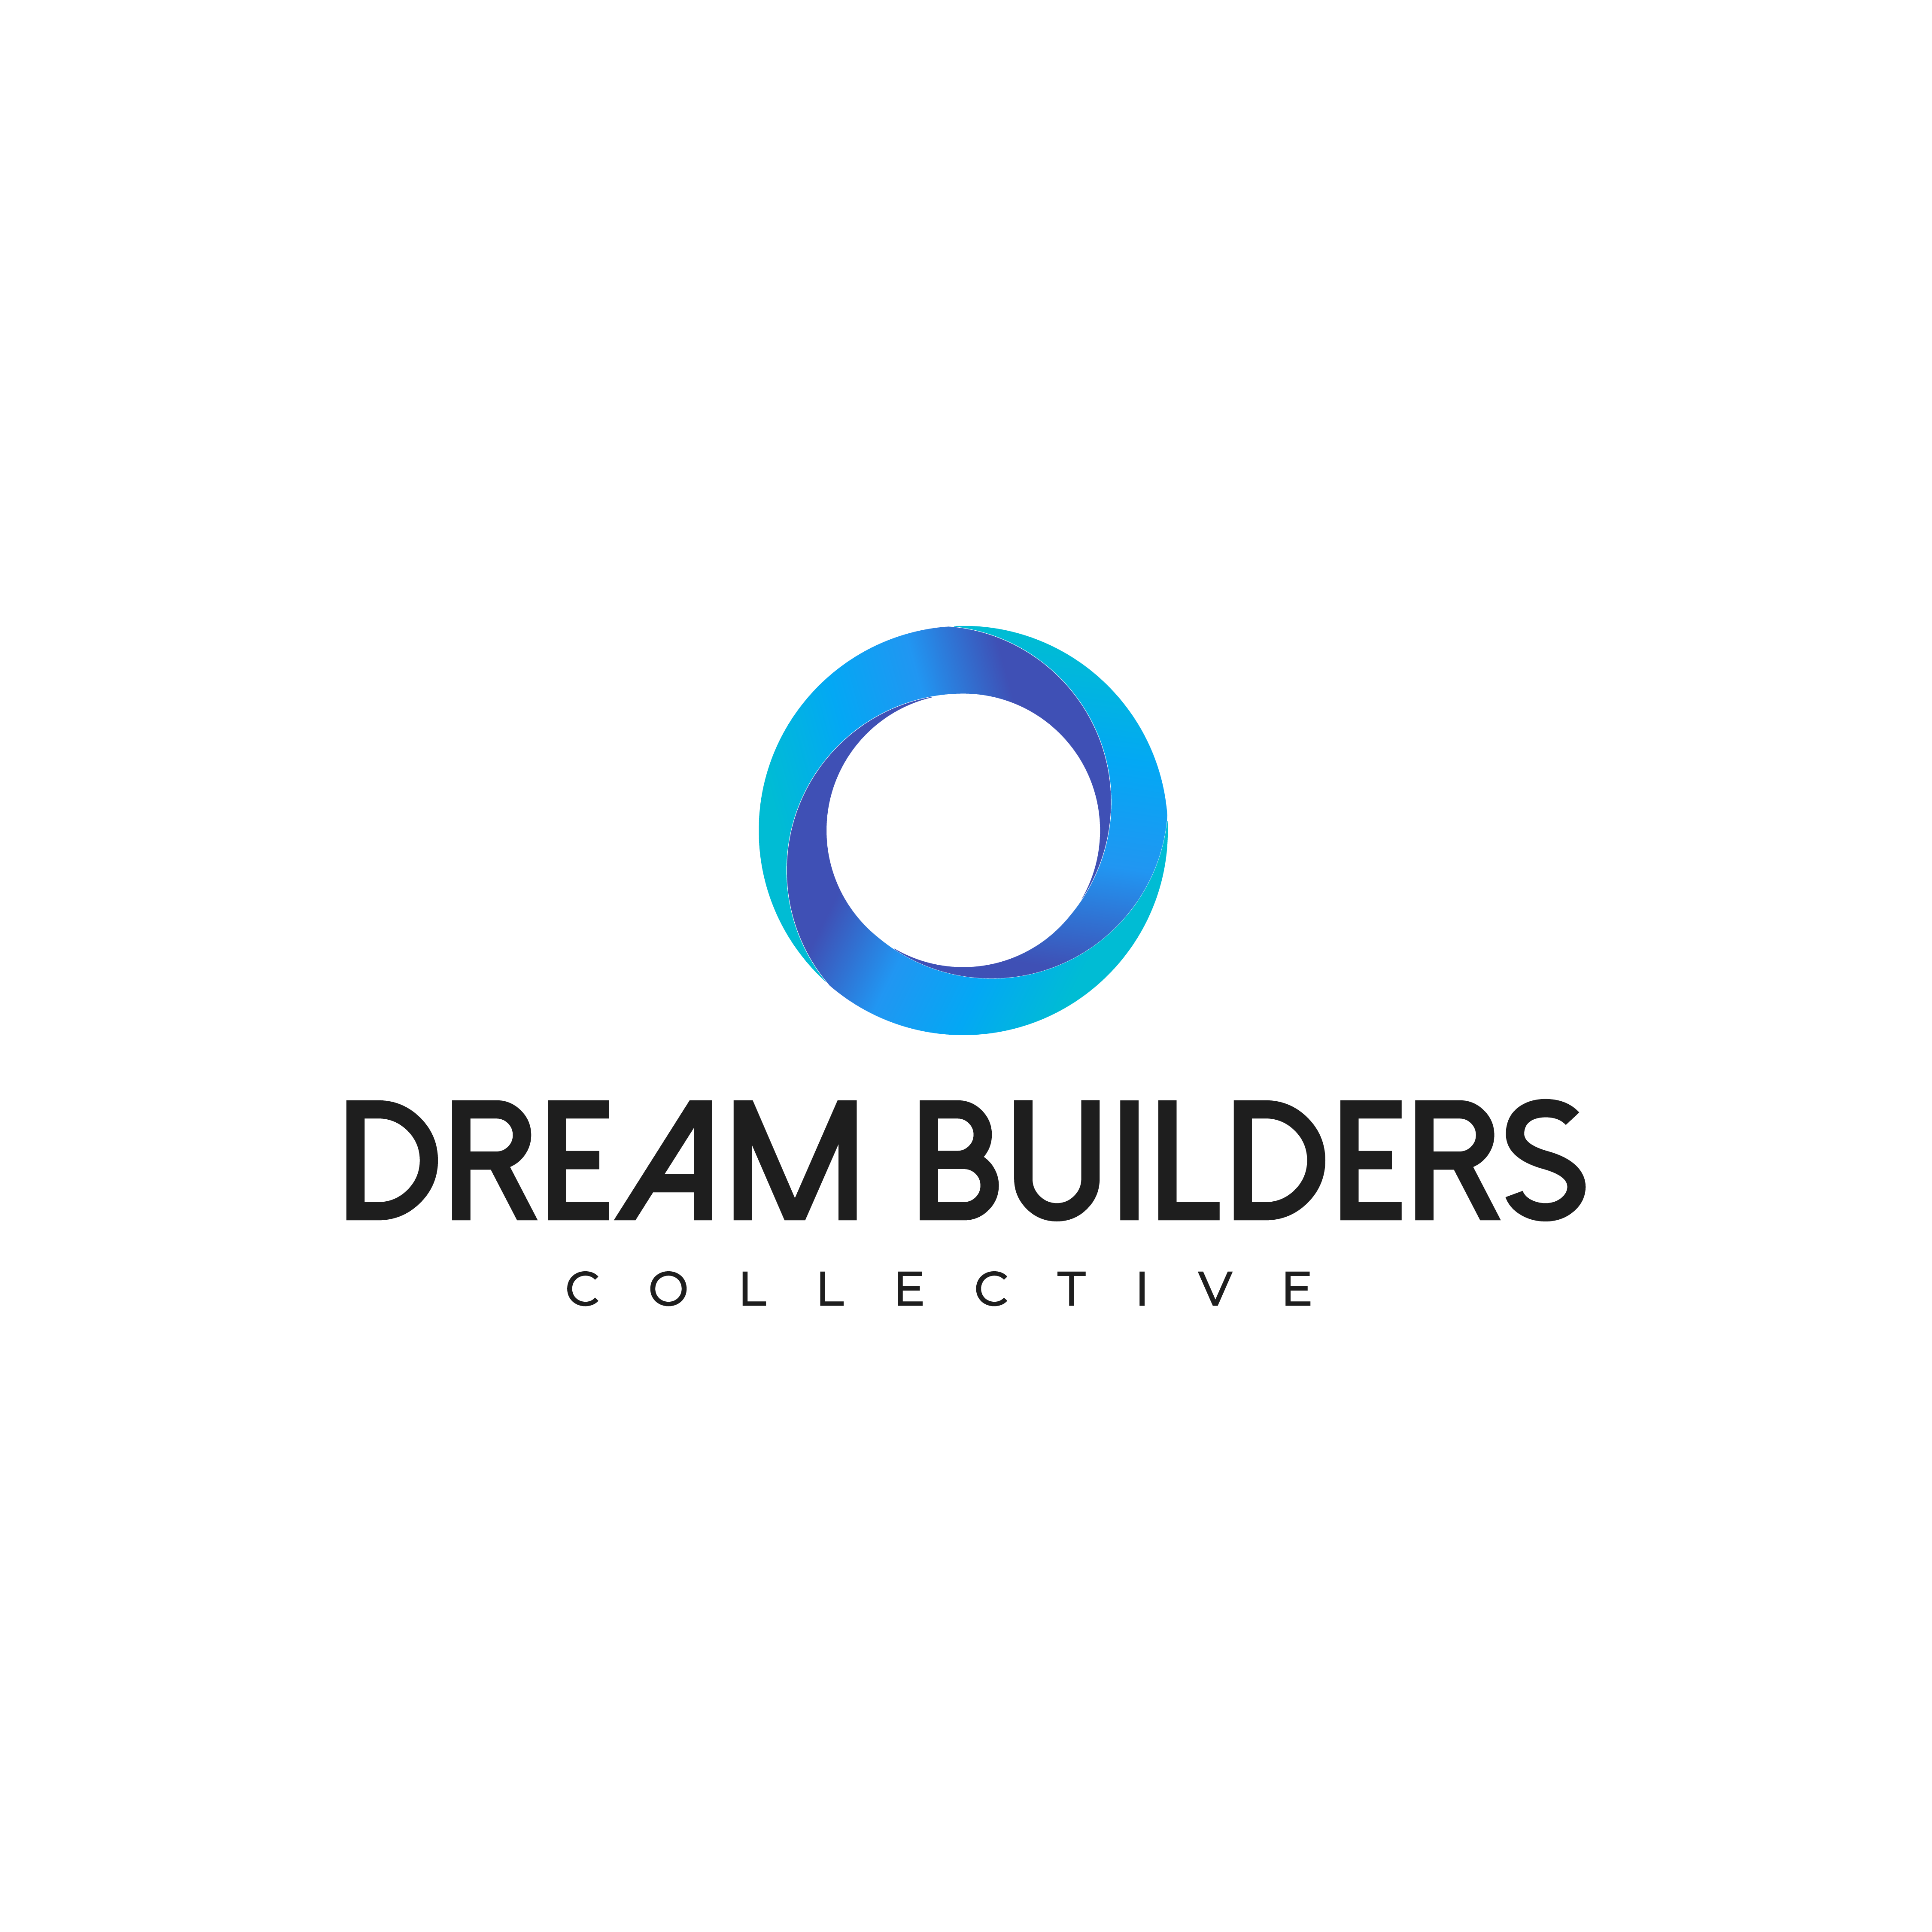 Dream Builders Collective